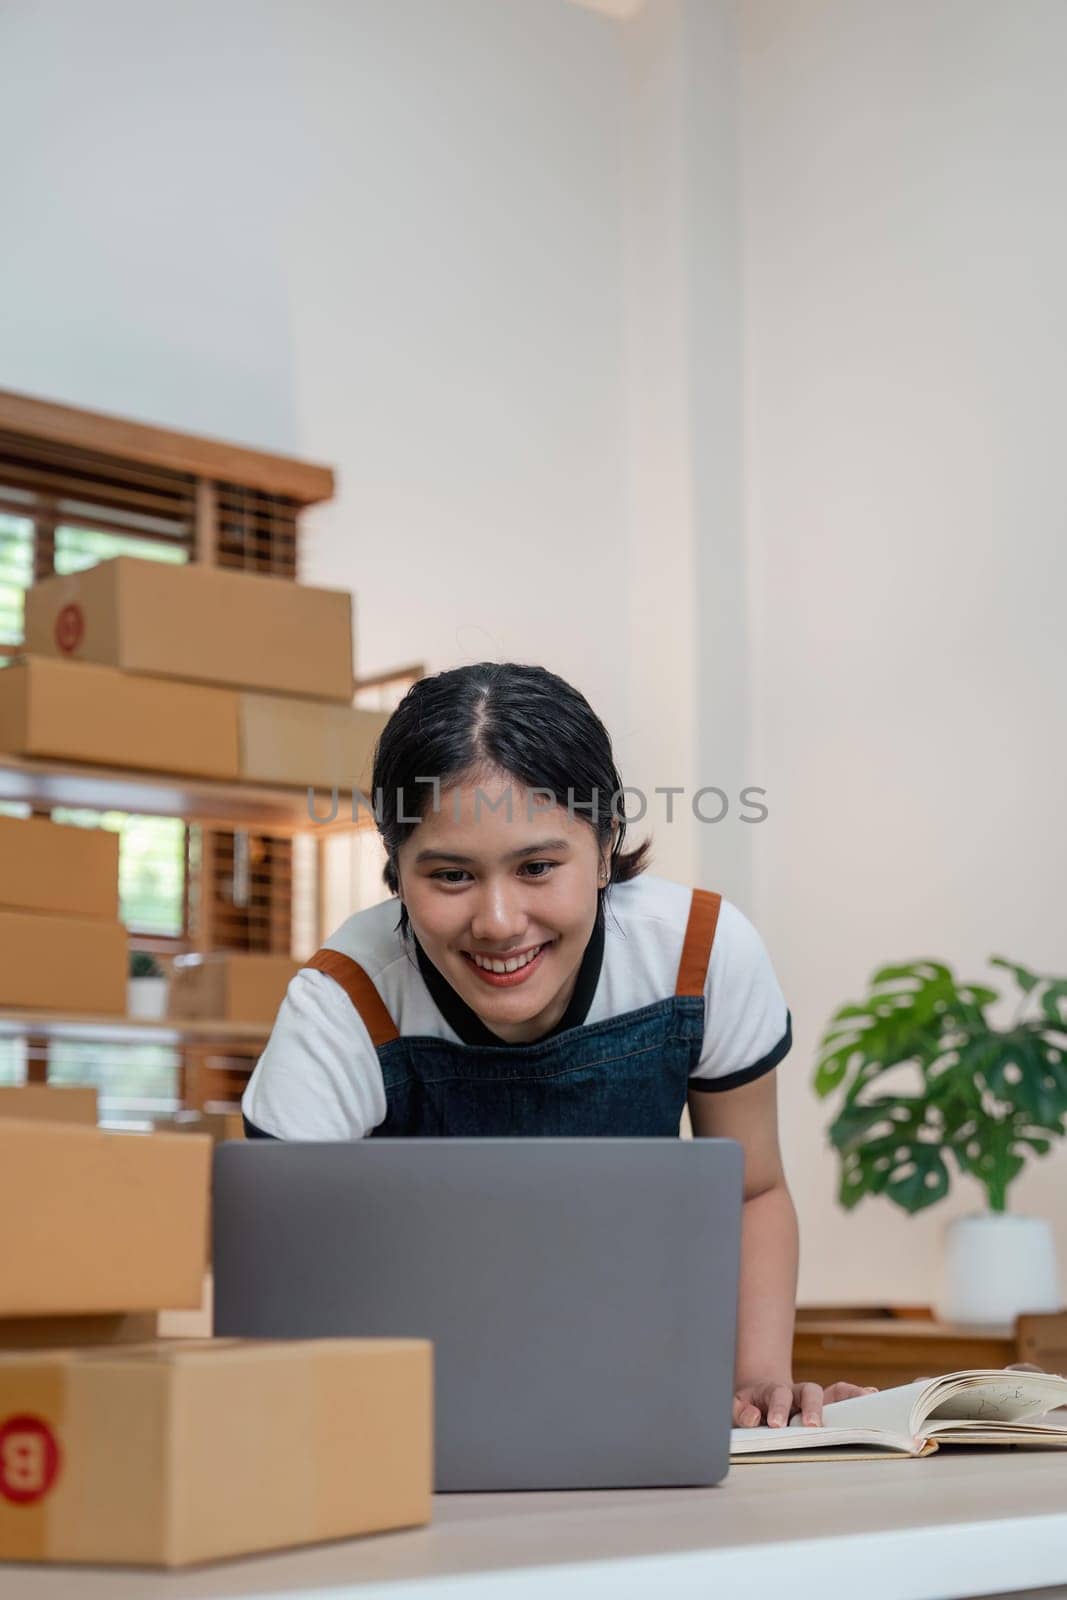 Starting small businesses SME owners female entrepreneurs check online orders to prepare to pack the boxes, sell to customers, business ideas online.